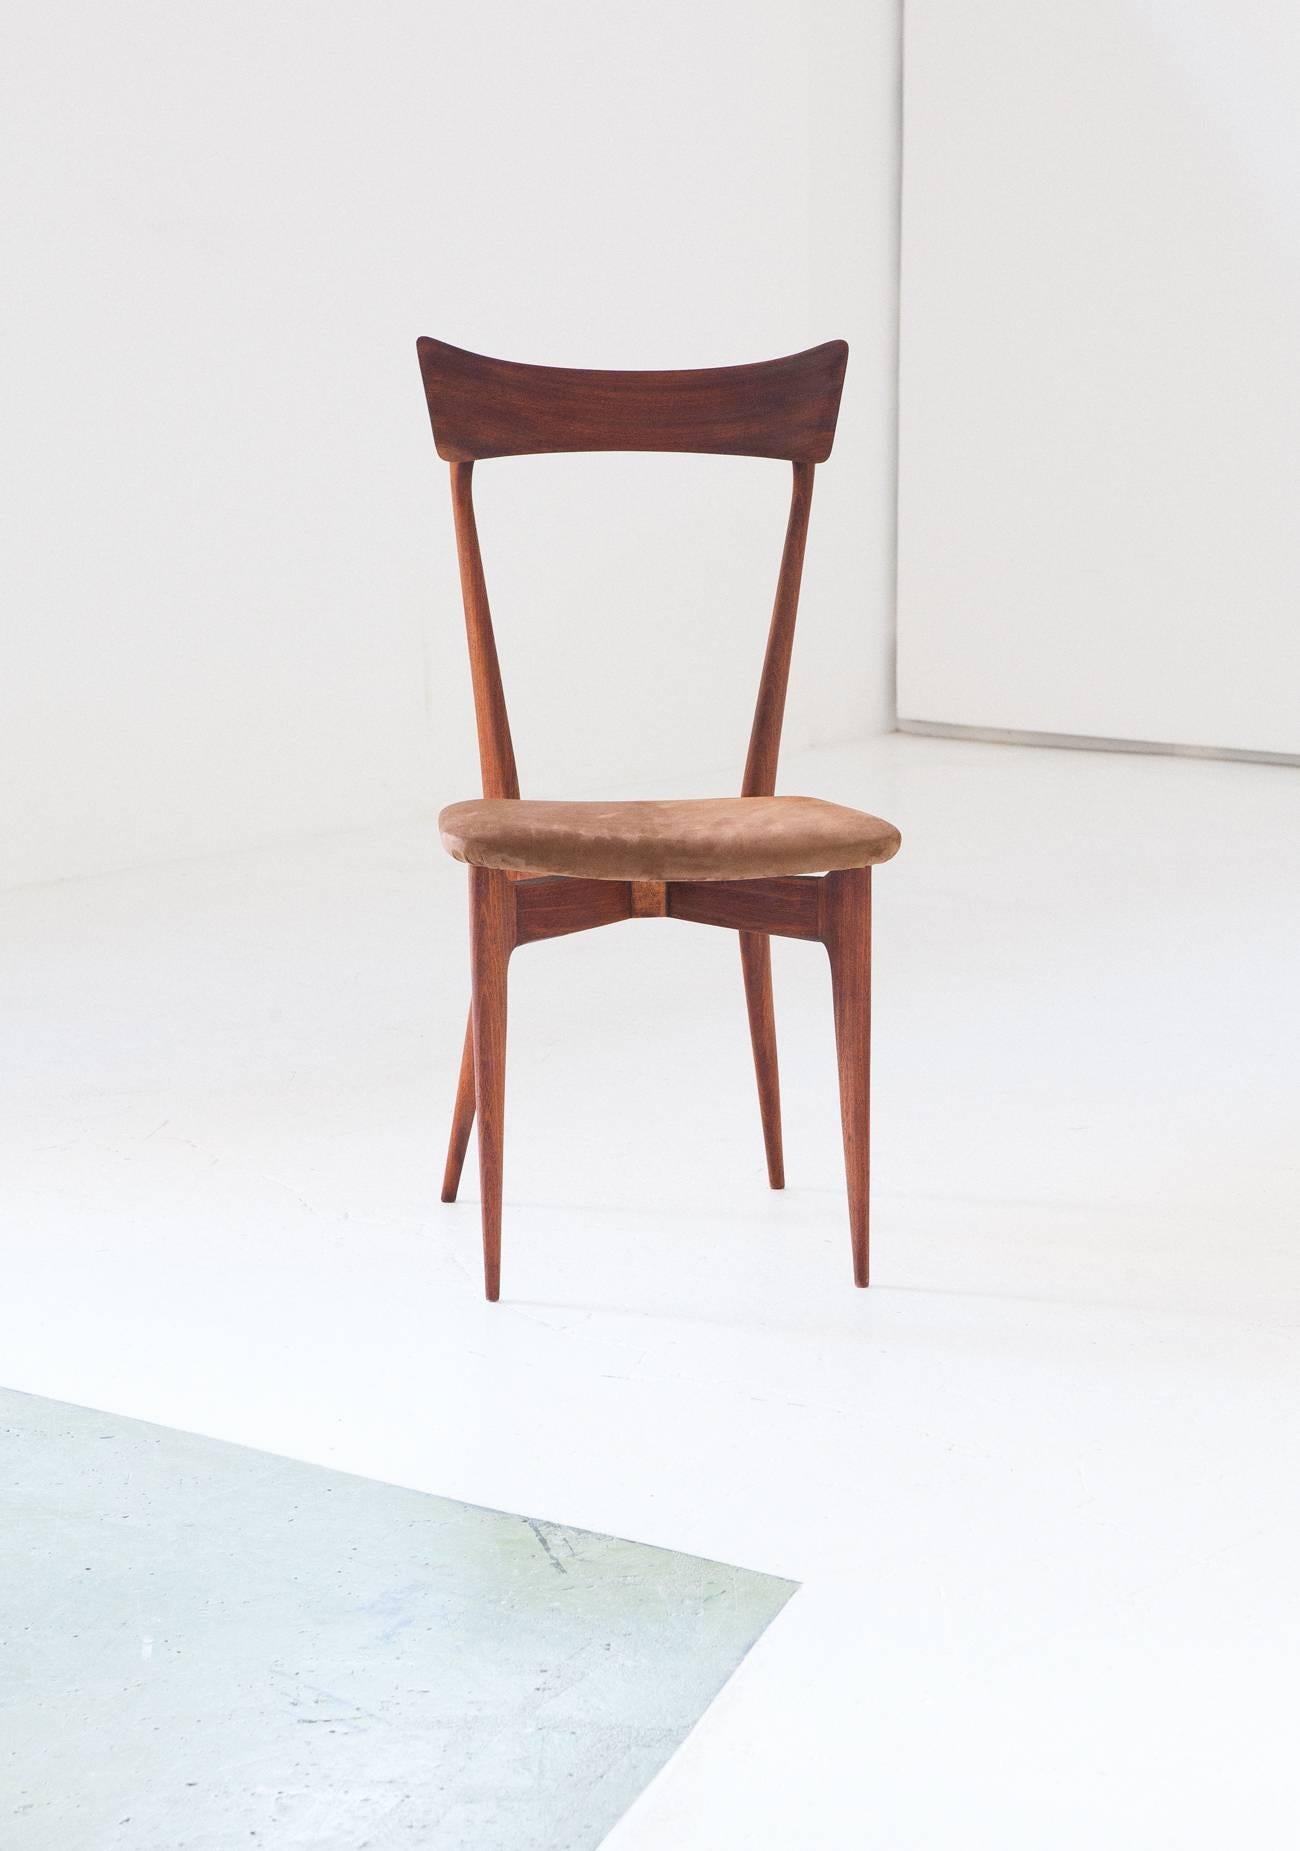 Set of six Italian dining chairs designed by Ico Parisi and produced by Paolo Longoni Cabiale (the company logo is visible under the seat upholstery)
The mahogany wood has been abrasived and oil finished, the seat has been covered with new natural